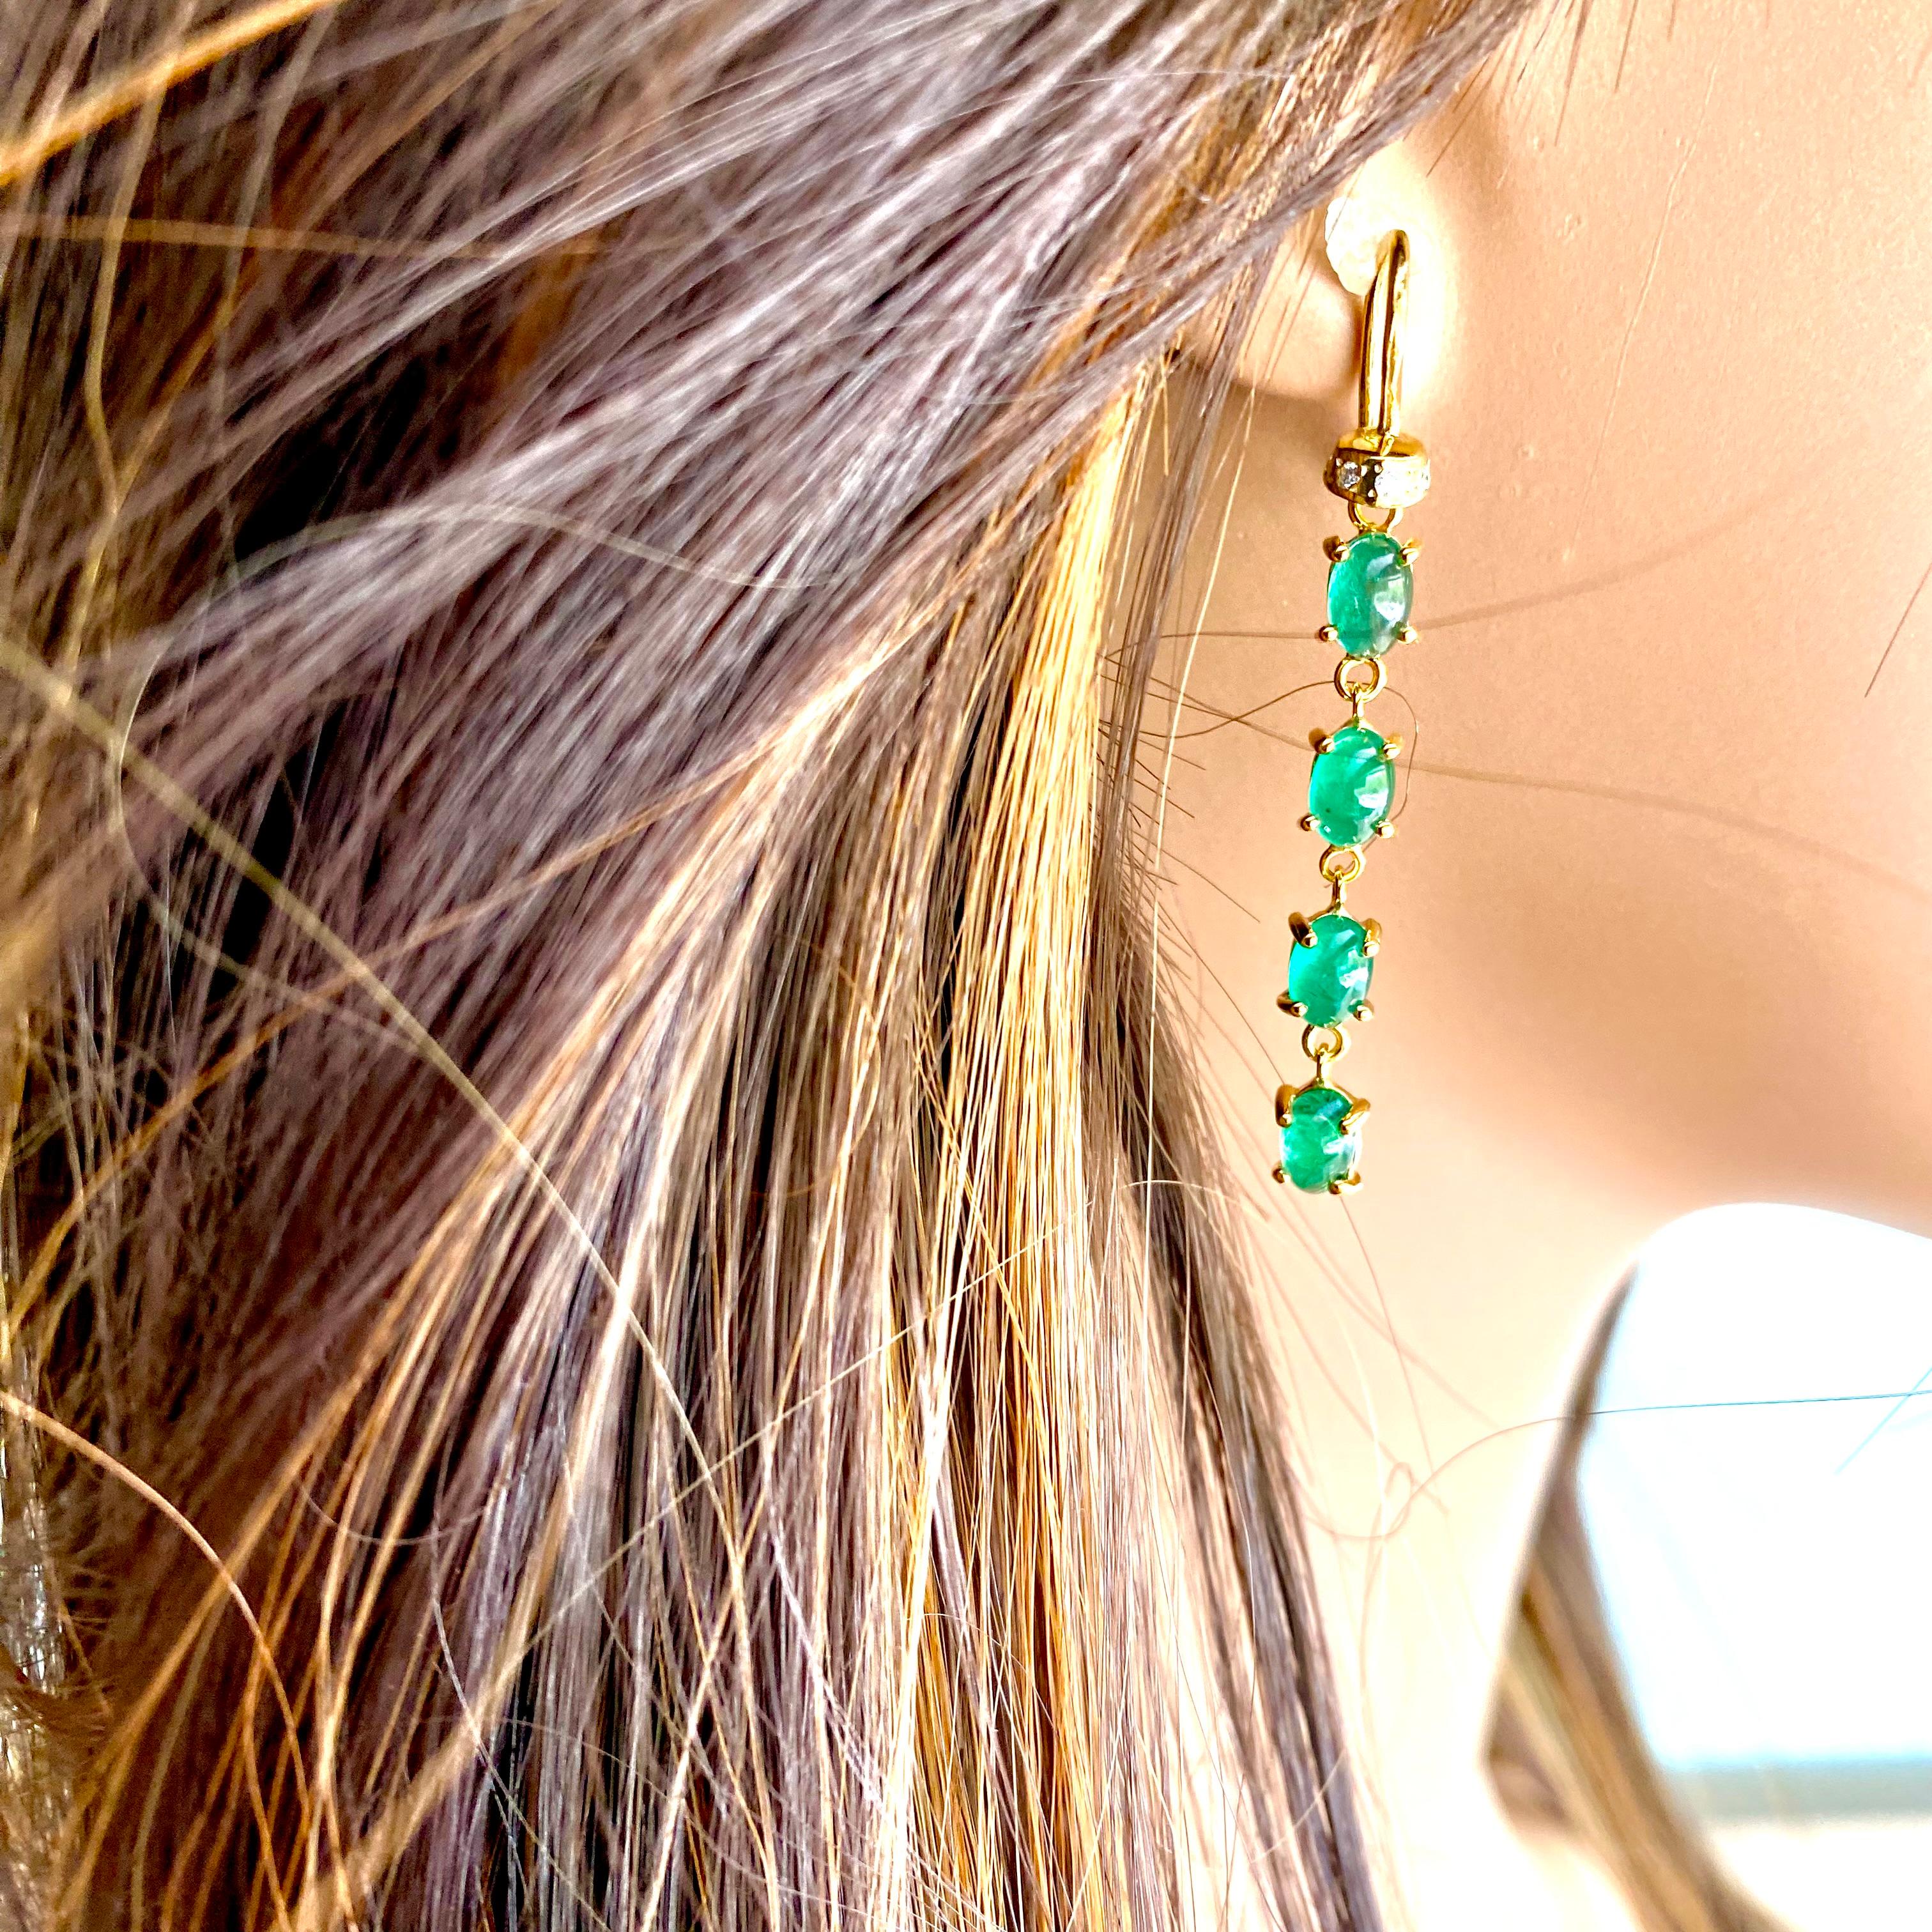 Cabochon Emerald and Diamond Yellow Gold Hoop Drop Earrings are a luxurious piece of jewelry that is designed to enhance any formal or casual outfit, measuring 1.50 inch long.
The earrings feature a sleek 14 karat yellow gold hoop that dangles from